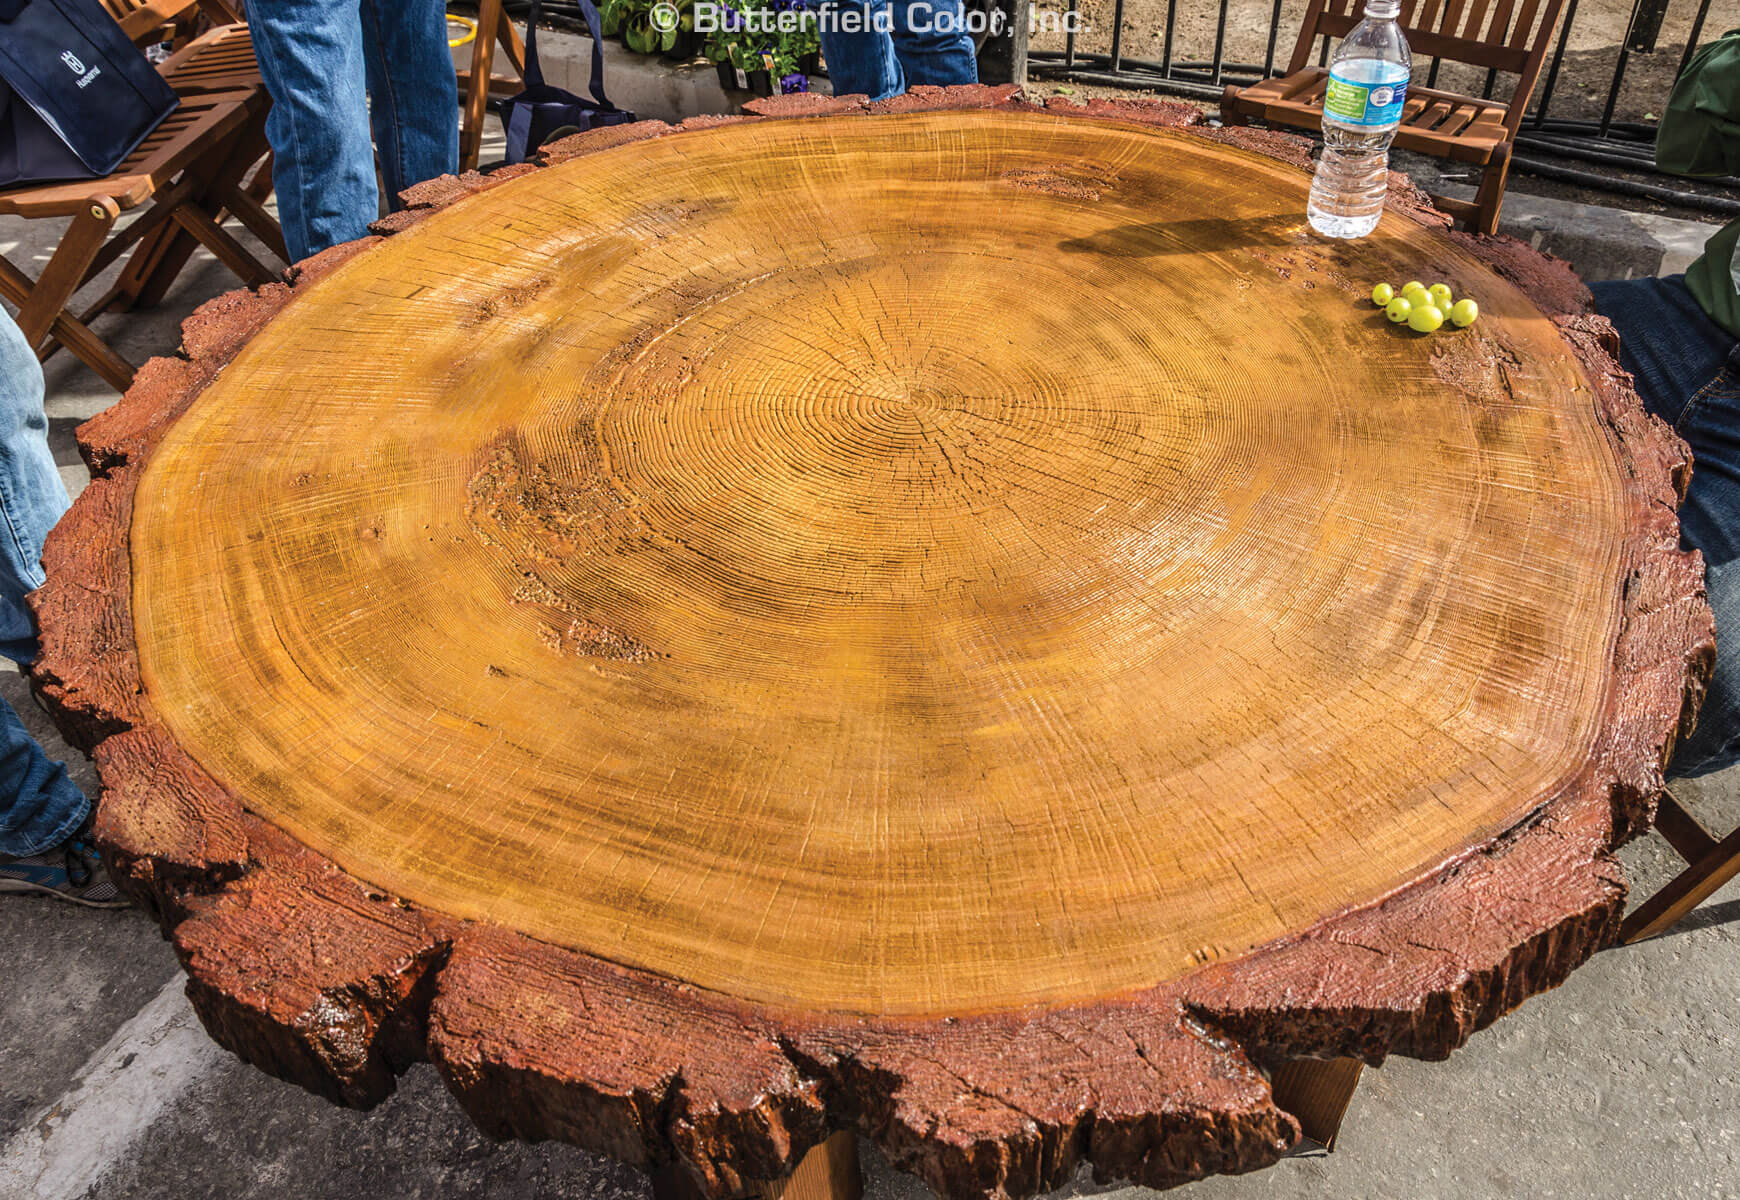 4' Log Round Table Top Mold - Butterfield Color®